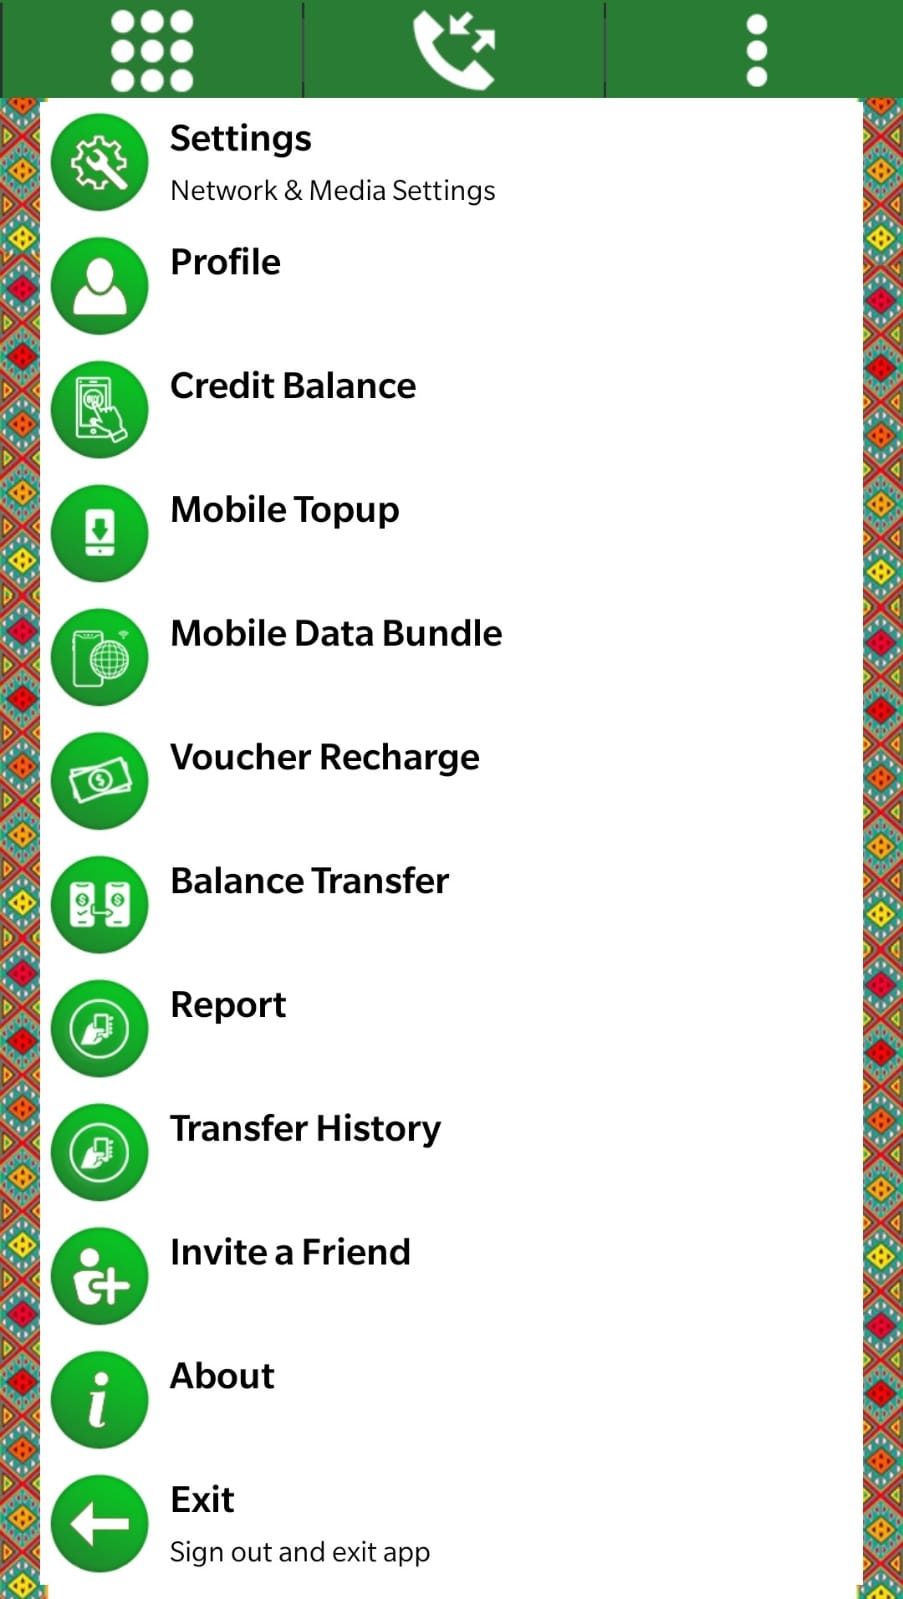 not just low cost international calling but worldwide mobile airtime recharge instantly and mobile data bundles for whatsapp and other app to app calls.